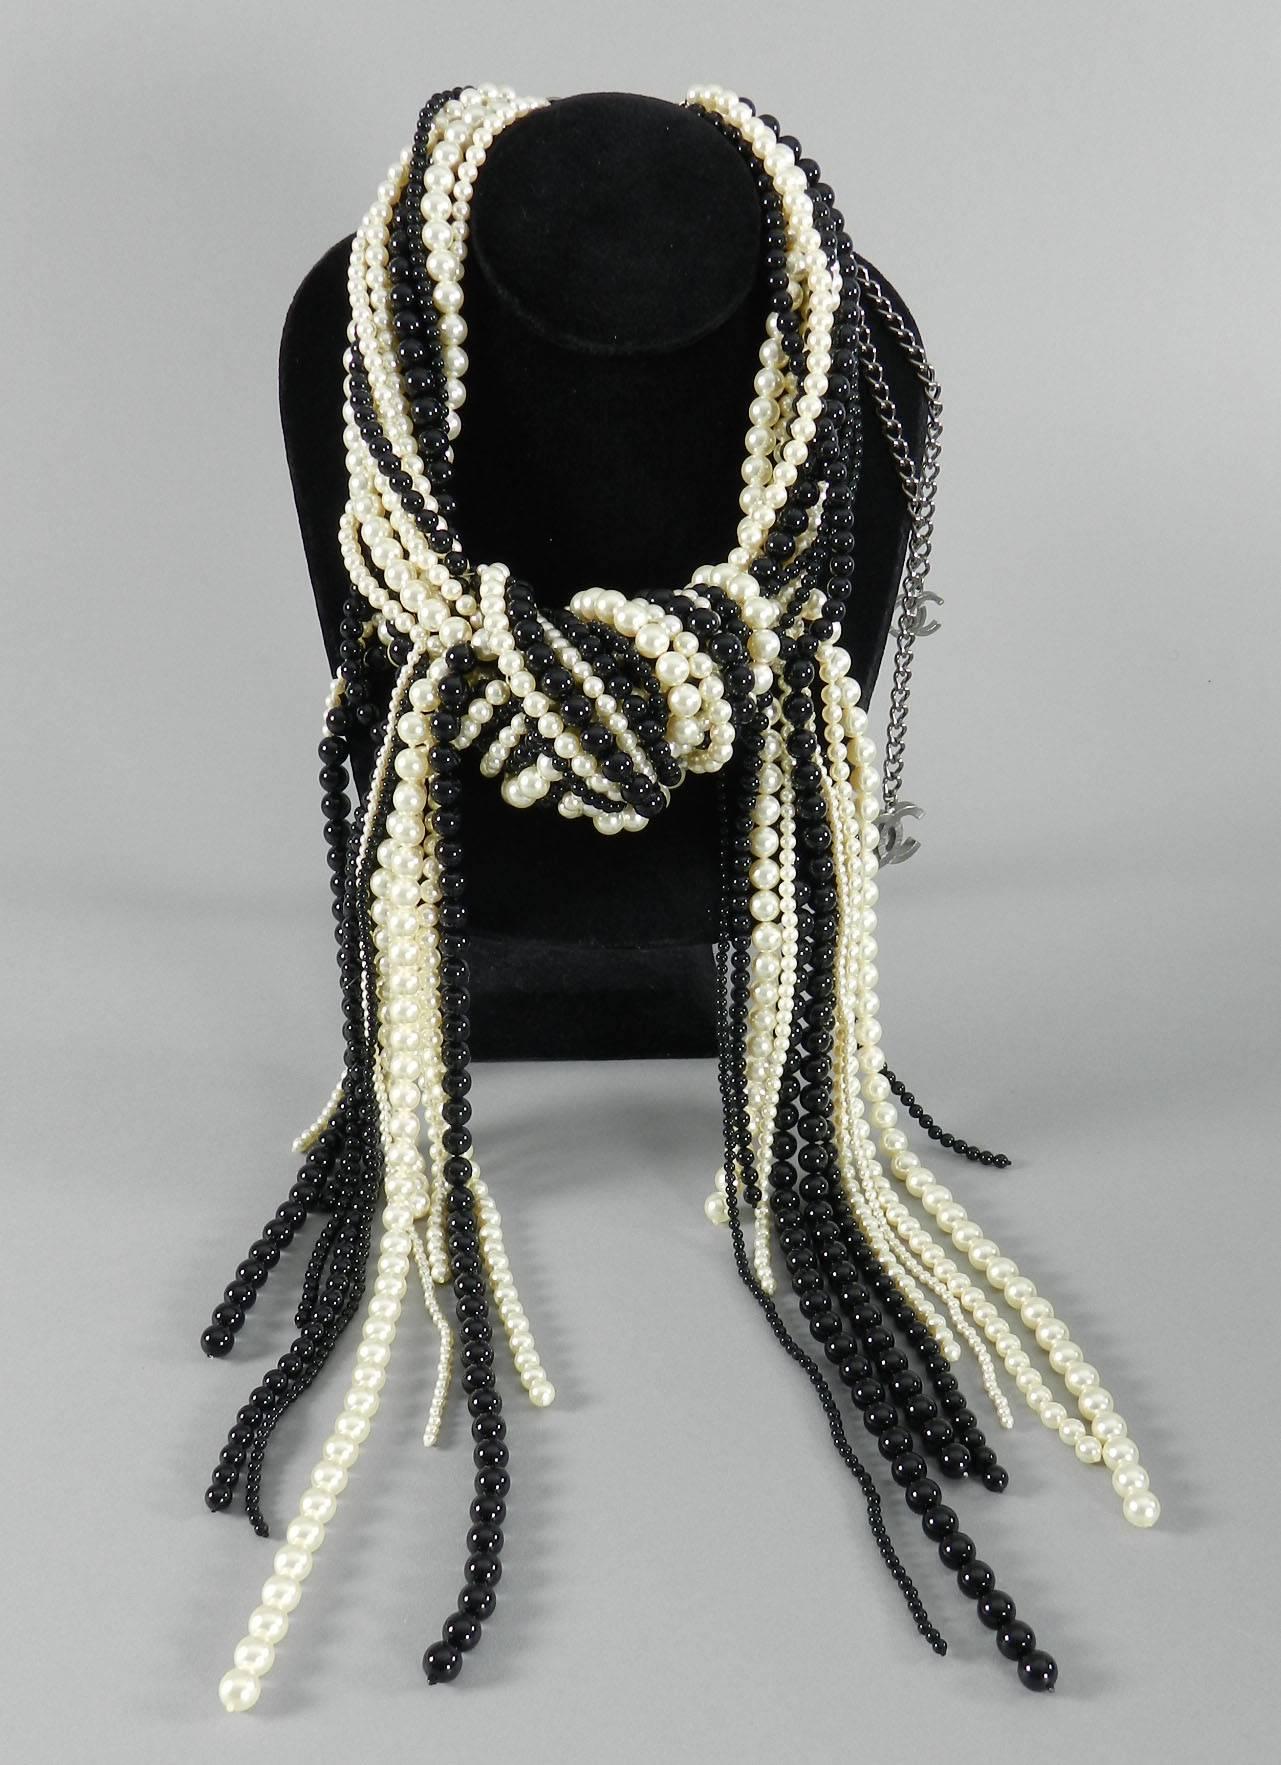 Chanel 14P Runway Black and Pearl Beaded Statement Necklace $10k+ 1